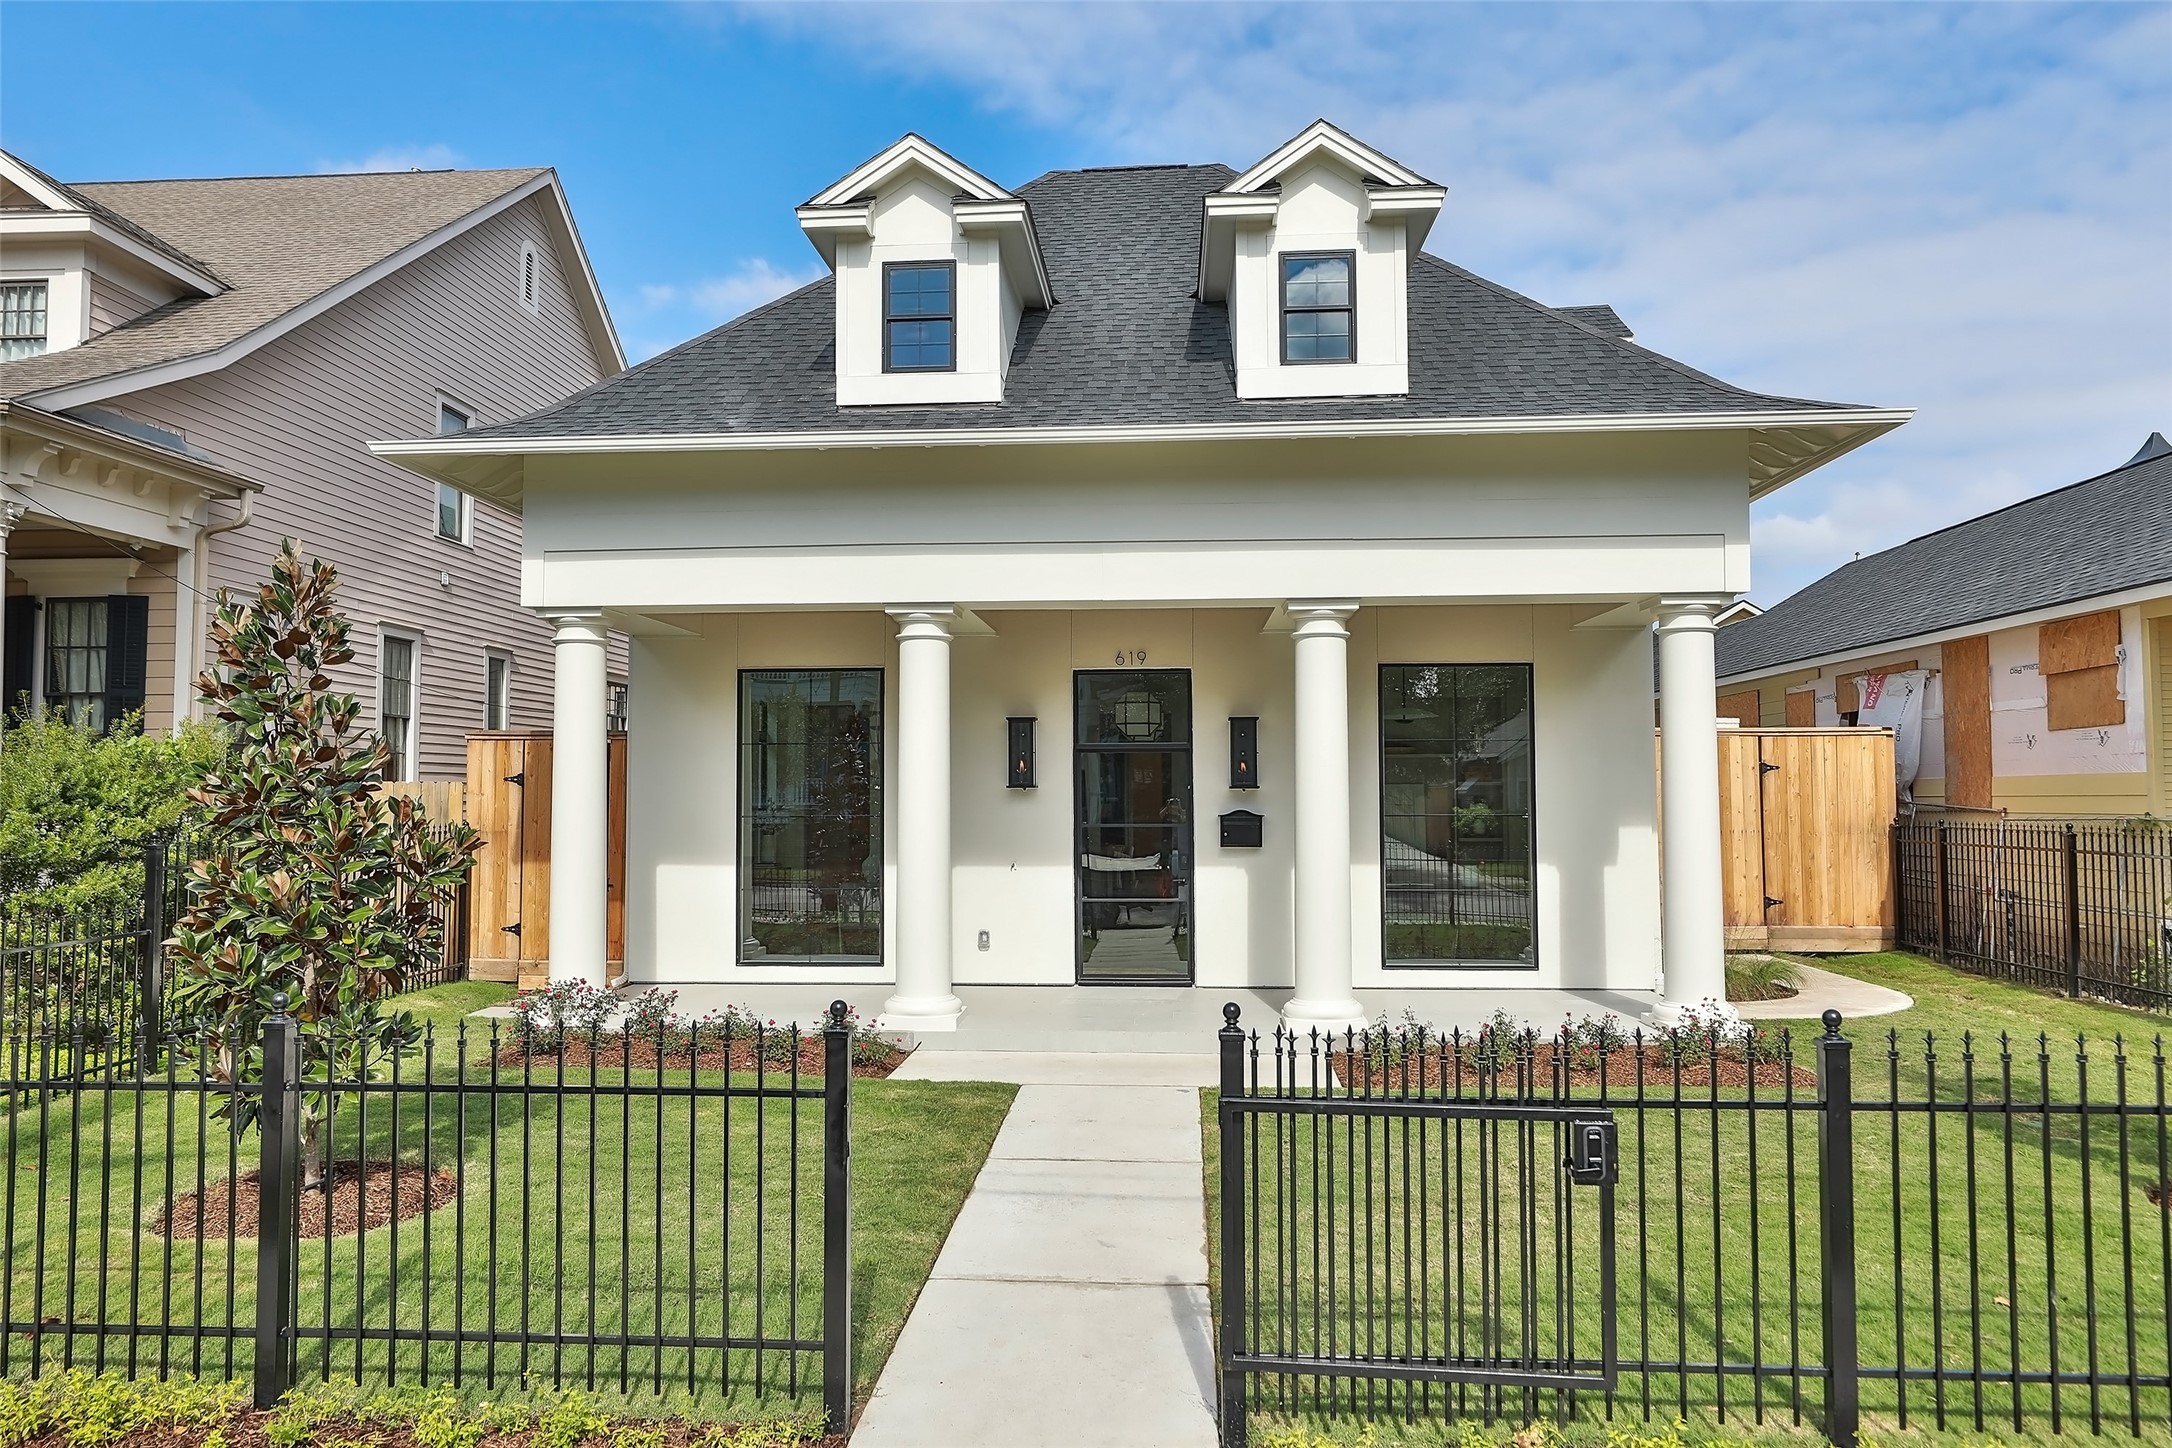 The front yard is enclosed with a wrought iron gate that locks, newly landscaped with two (2) southern Magnolia Trees. Tiled walkway leads to a large covered front patio with two elegant gas carriage lights and custom front door.